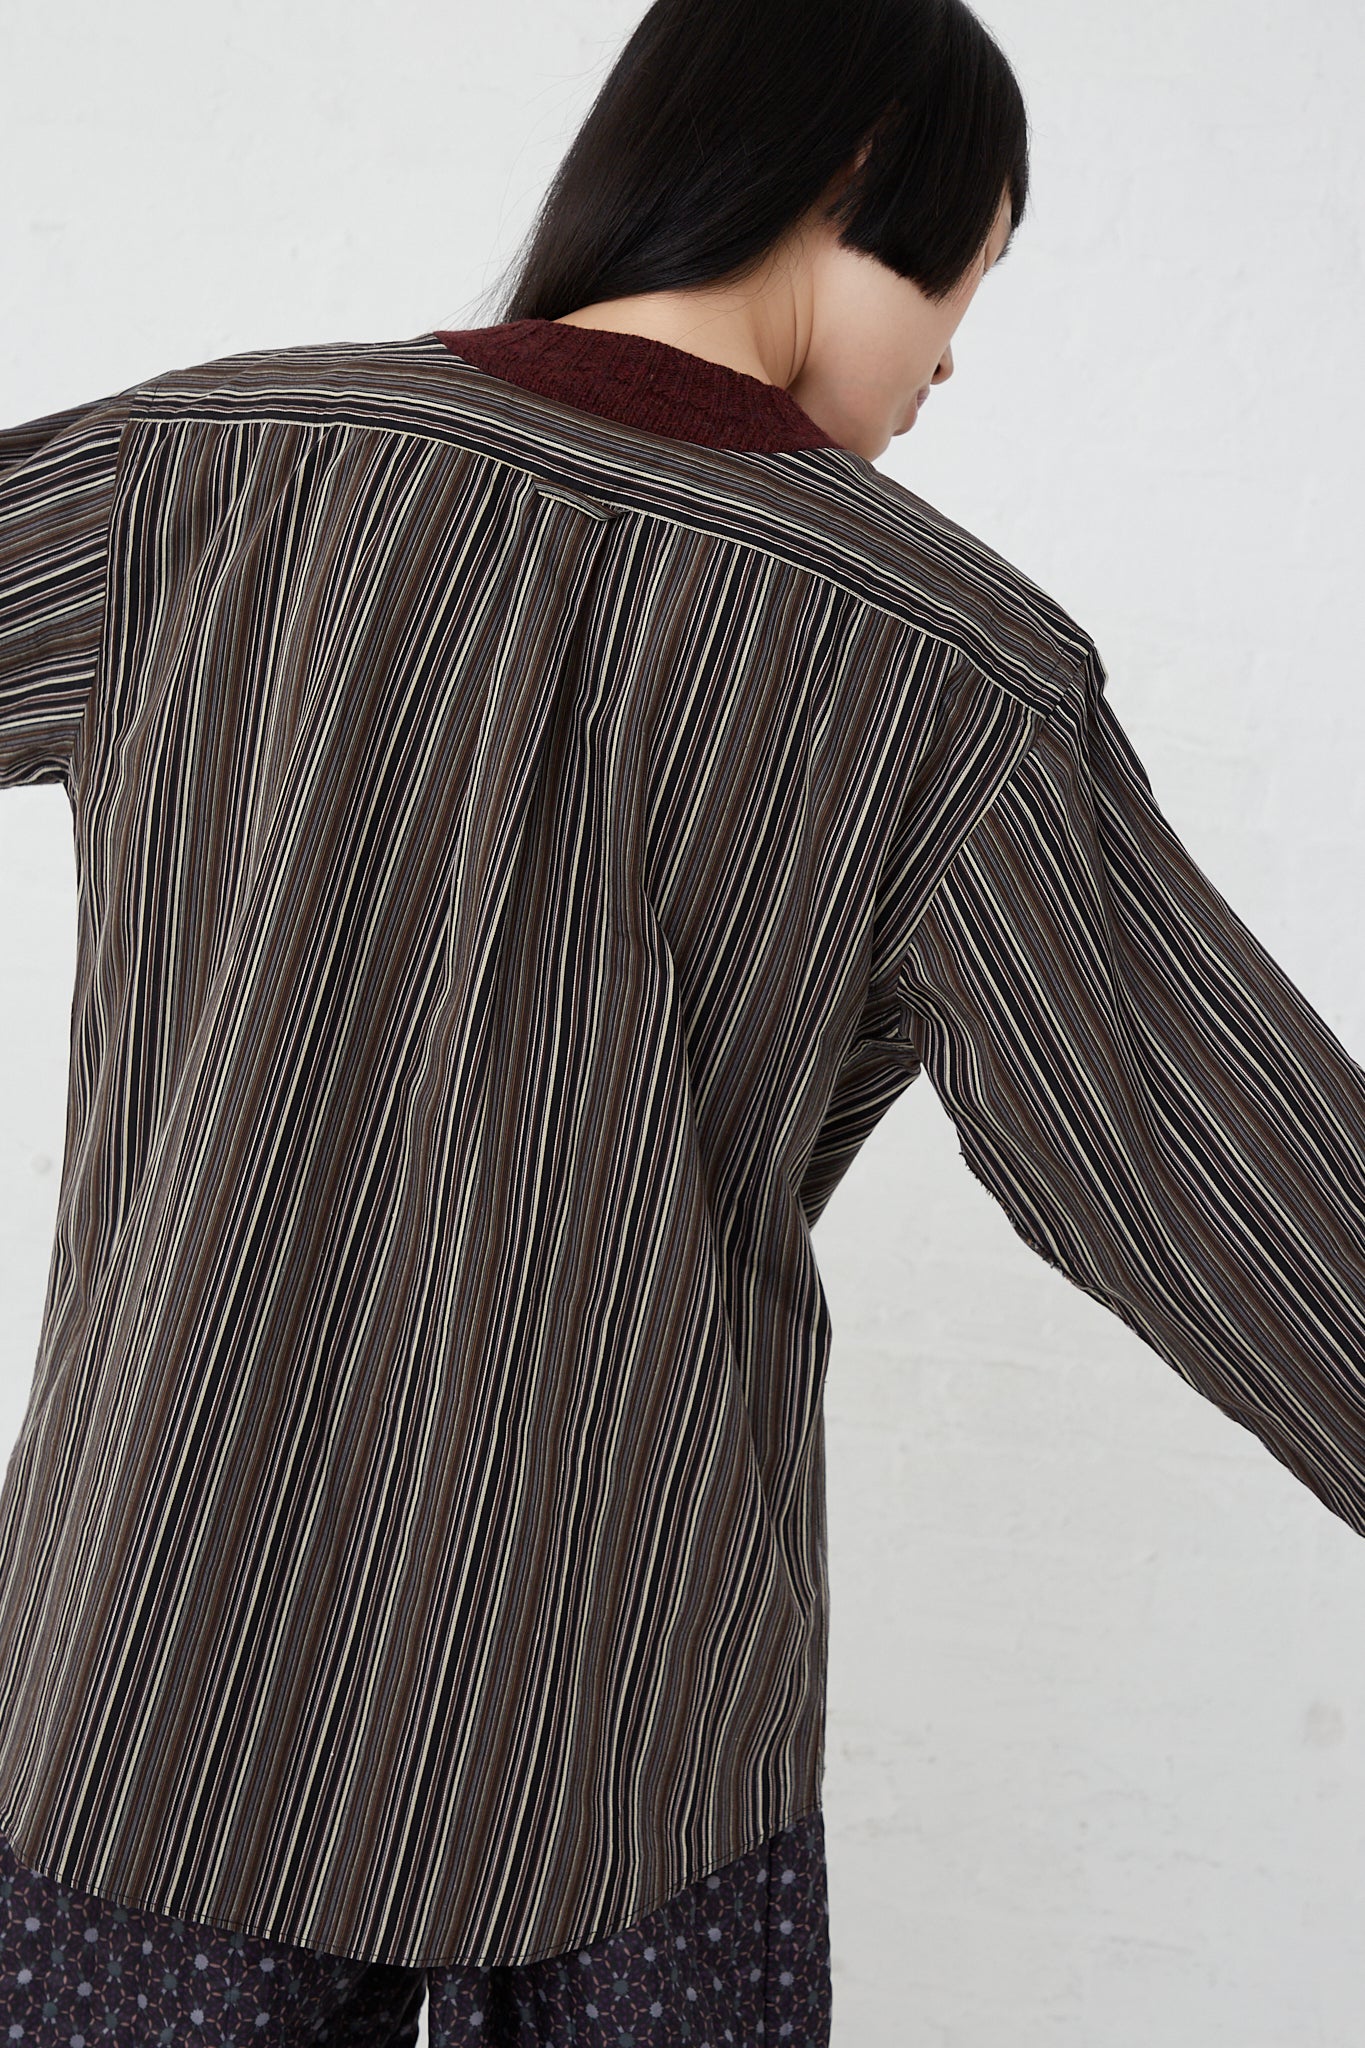 The back of a woman wearing a Bless No. 68 Front Insert Pullover in Stripe in a burgundy striped shirt.